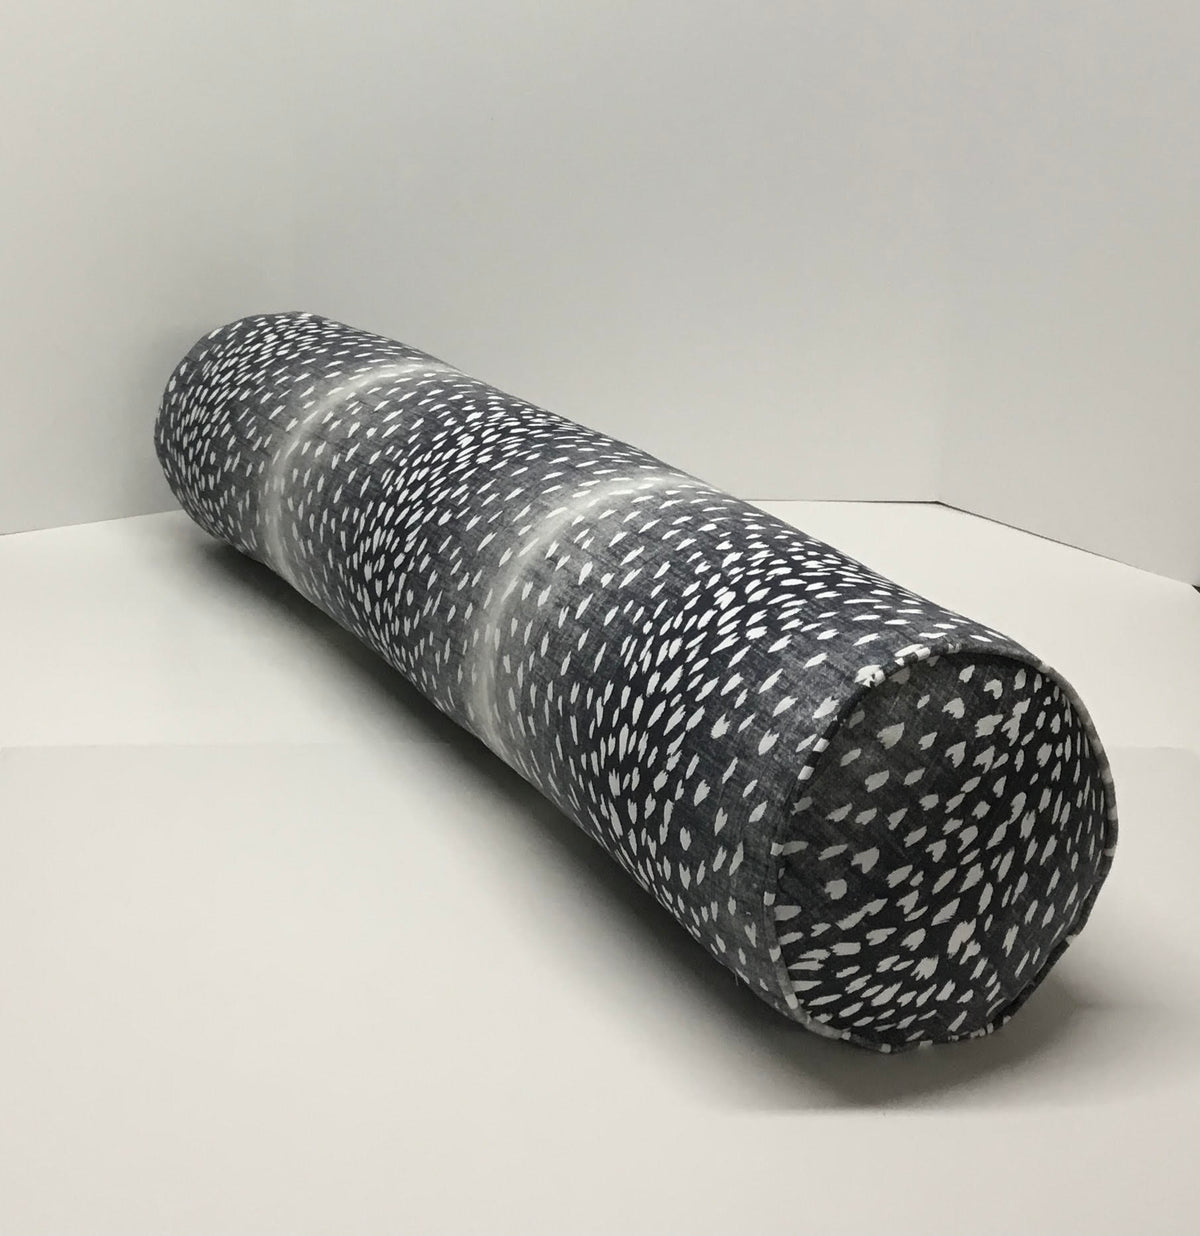 Bolster in Navy Antelope Fabric - Only One Available - Includes Insert